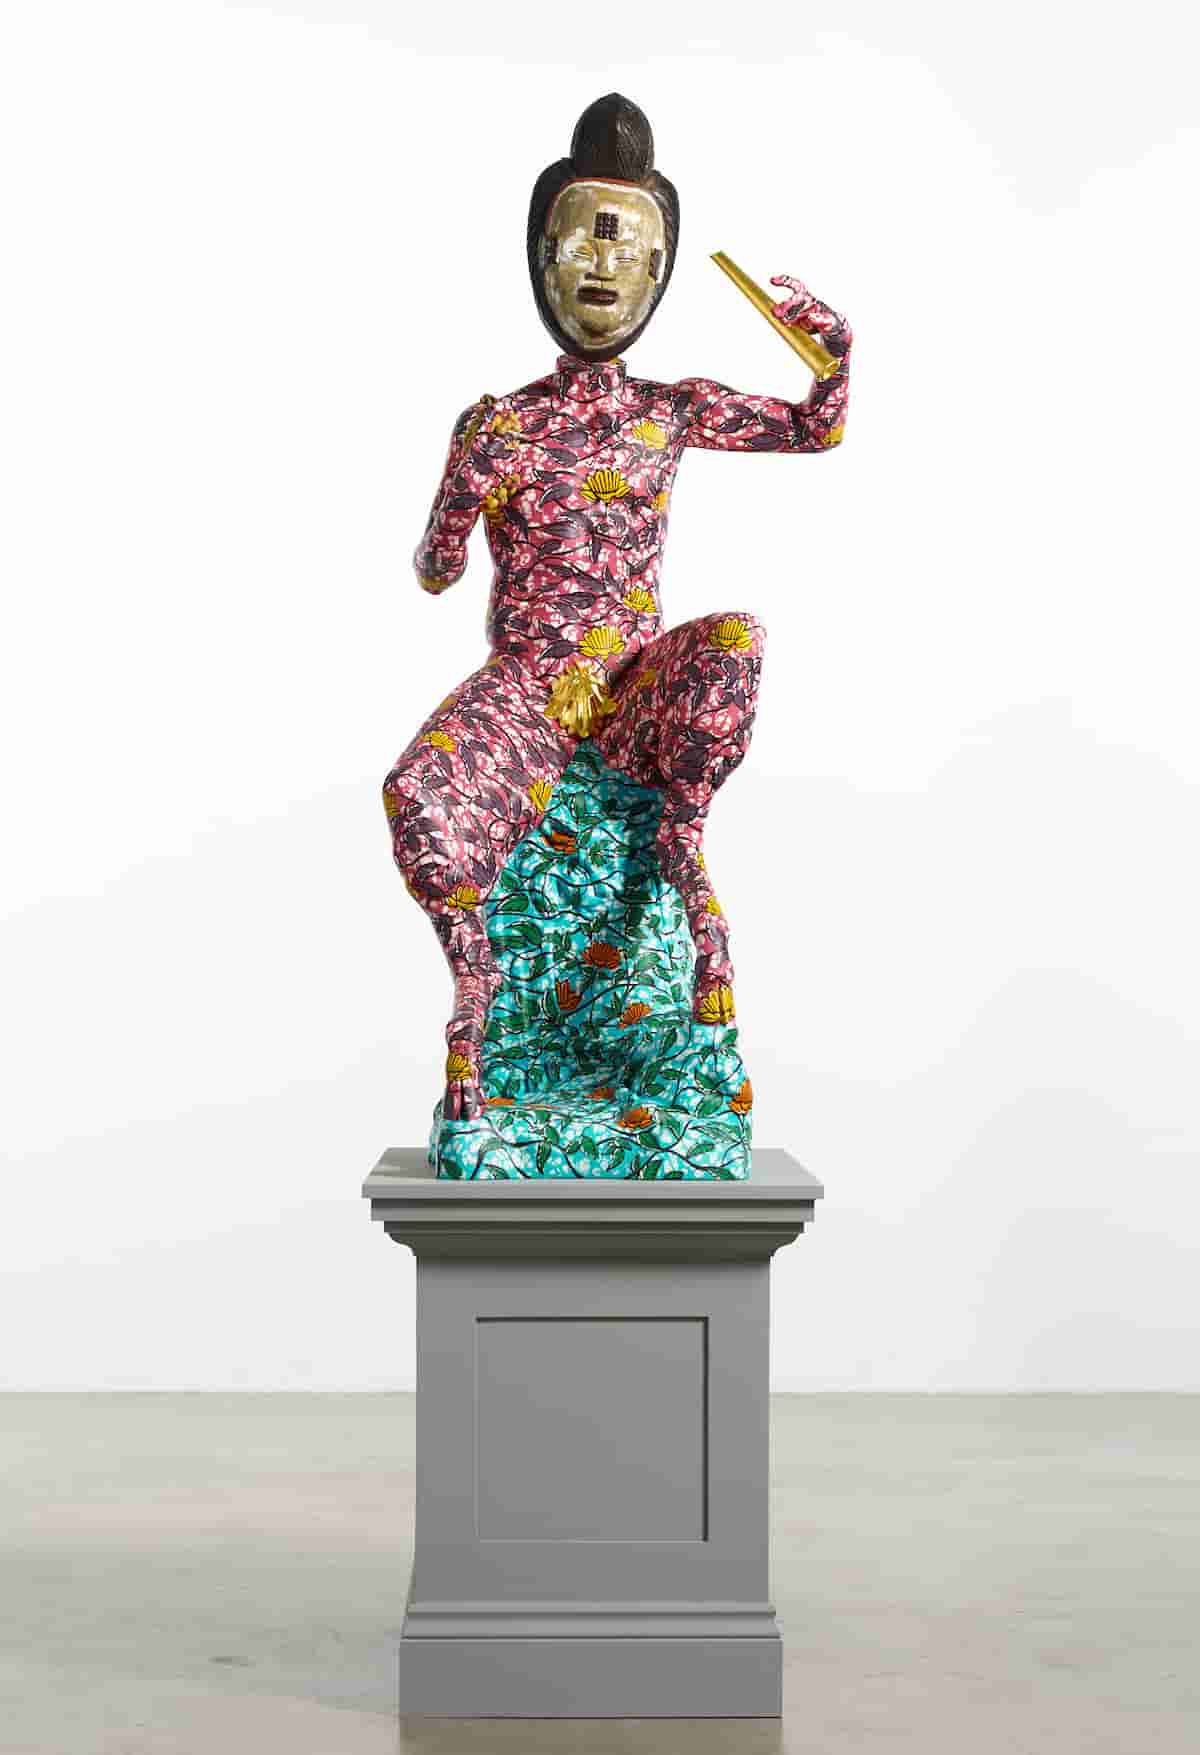 In Two Major Exhibitions, Yinka Shonibare CBE RA Celebrates African Aesthetics and Cultural Hybridity